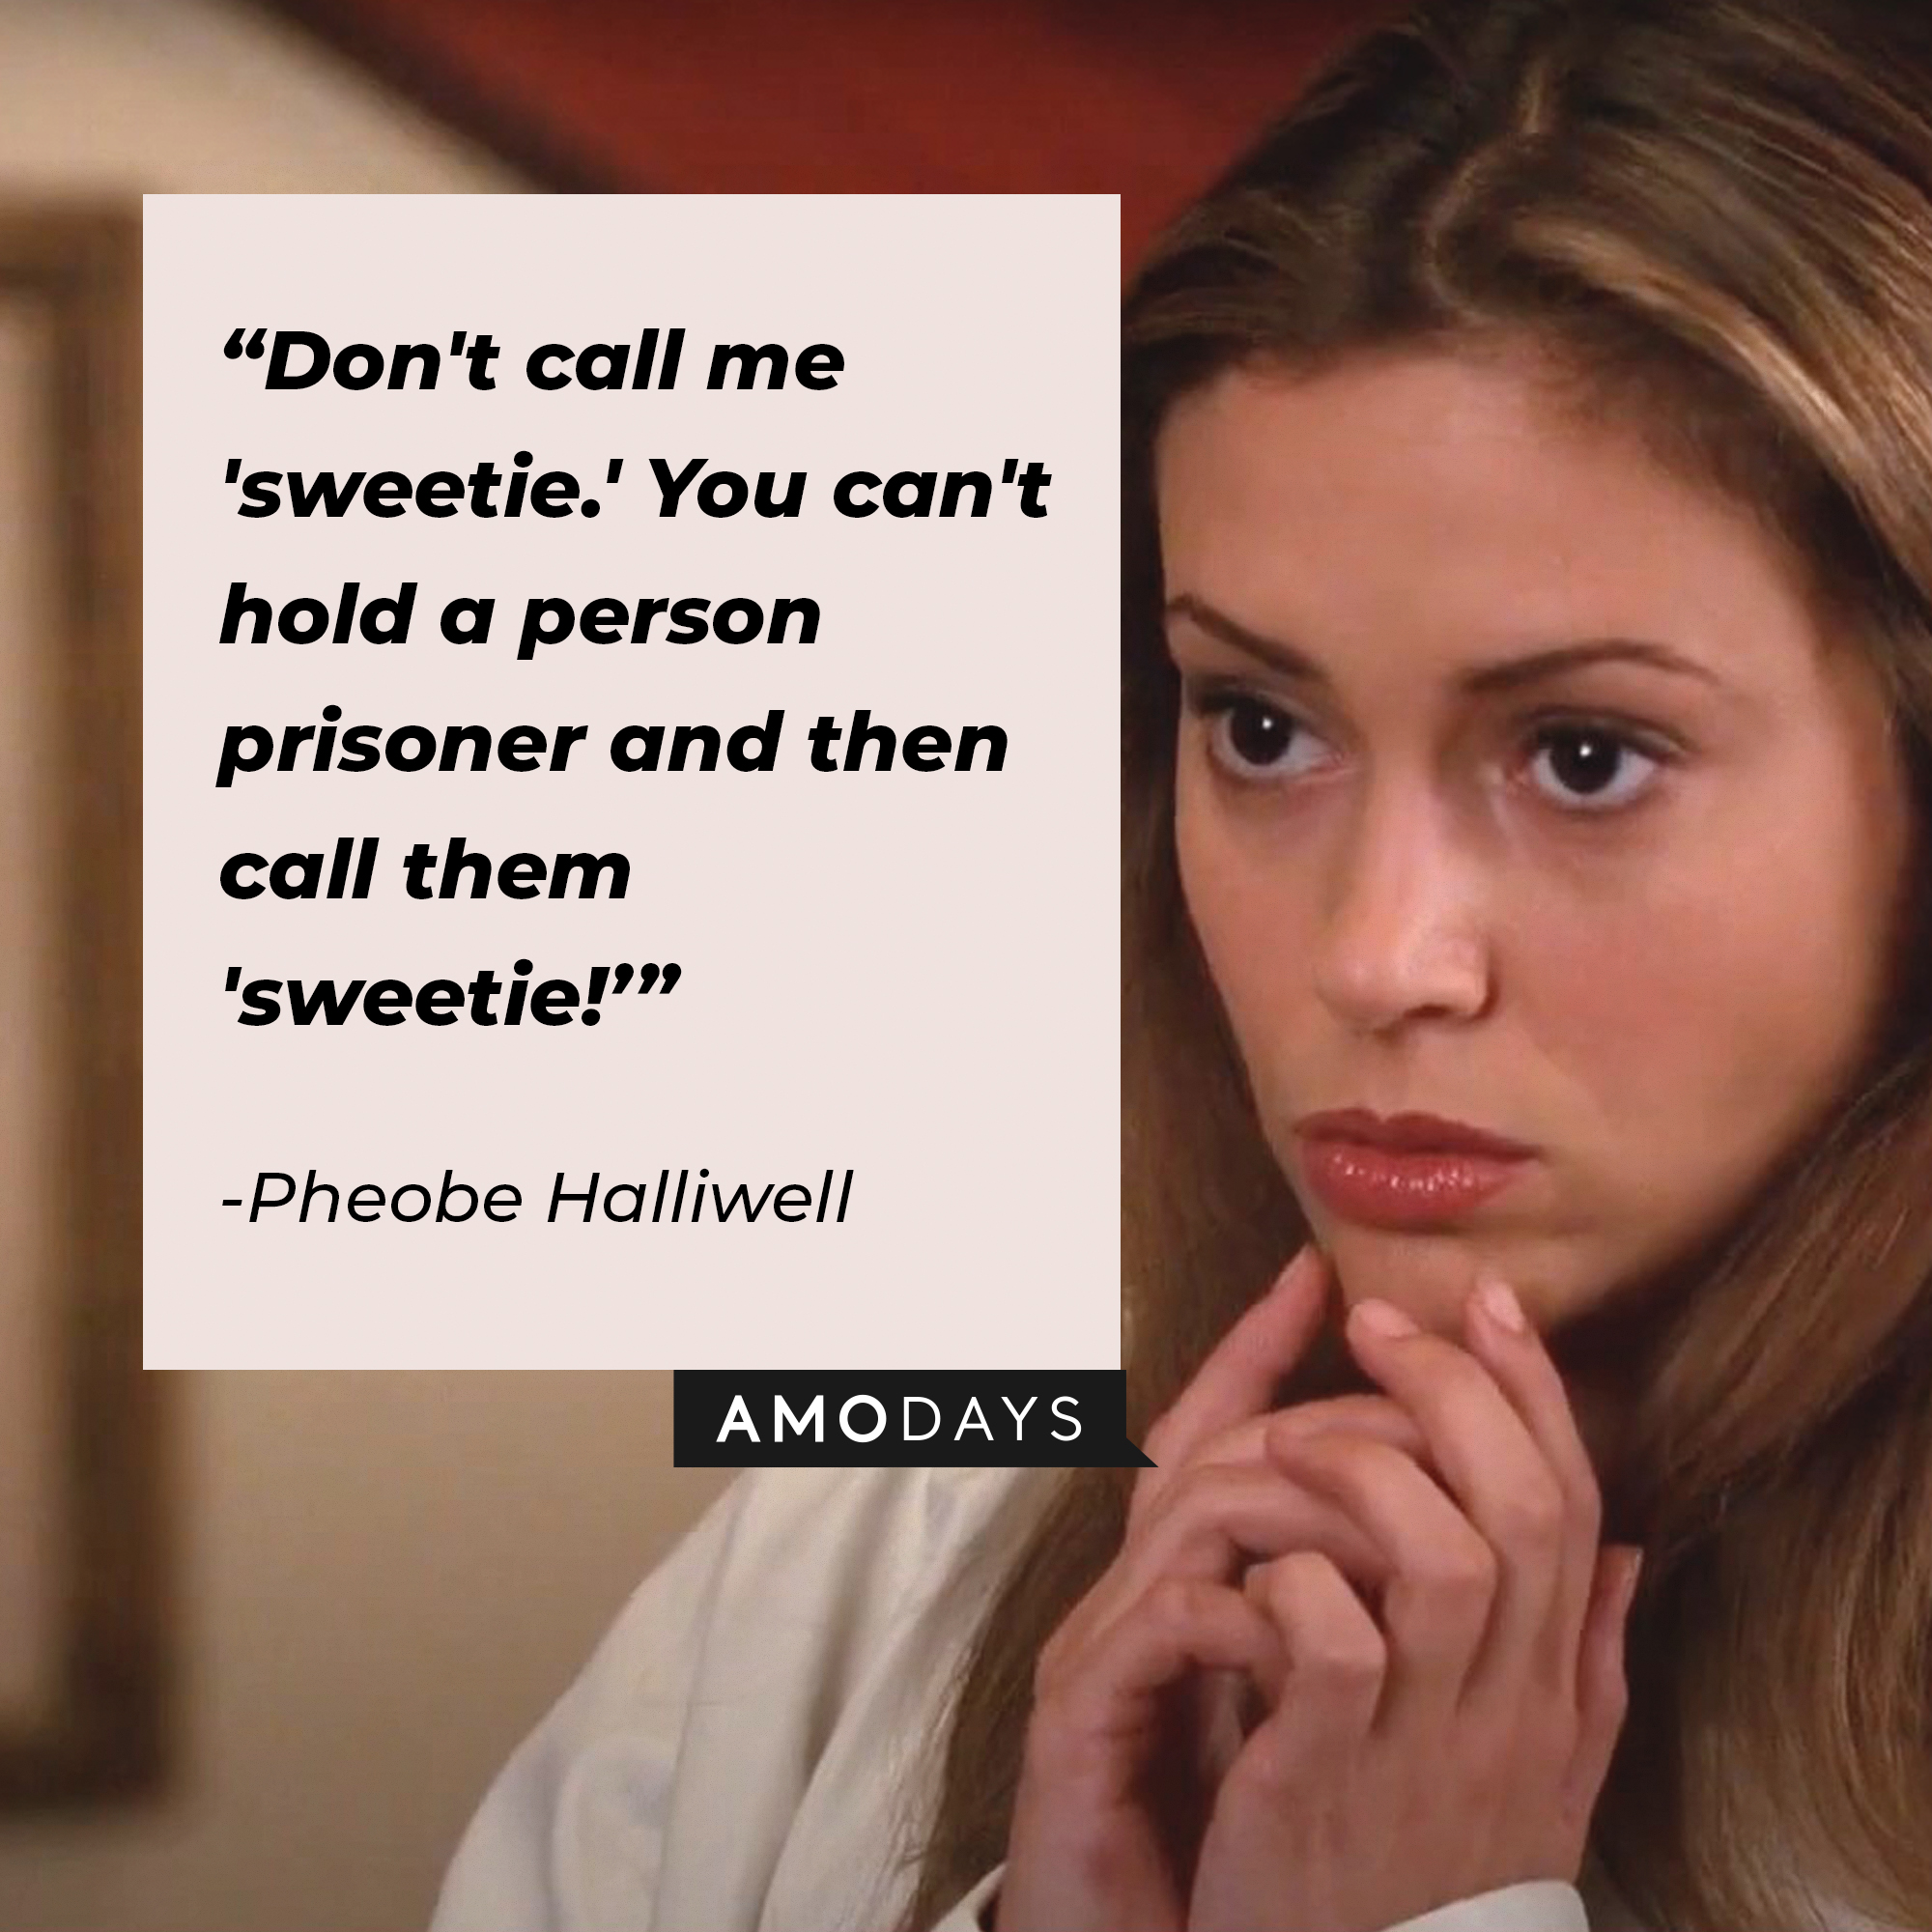 An image of Pheobe Halliwell with her quote: “Don't call me 'sweetie.' You can't hold a person prisoner and then call them 'sweetie!’” │Source: facebook.com/charmedtv